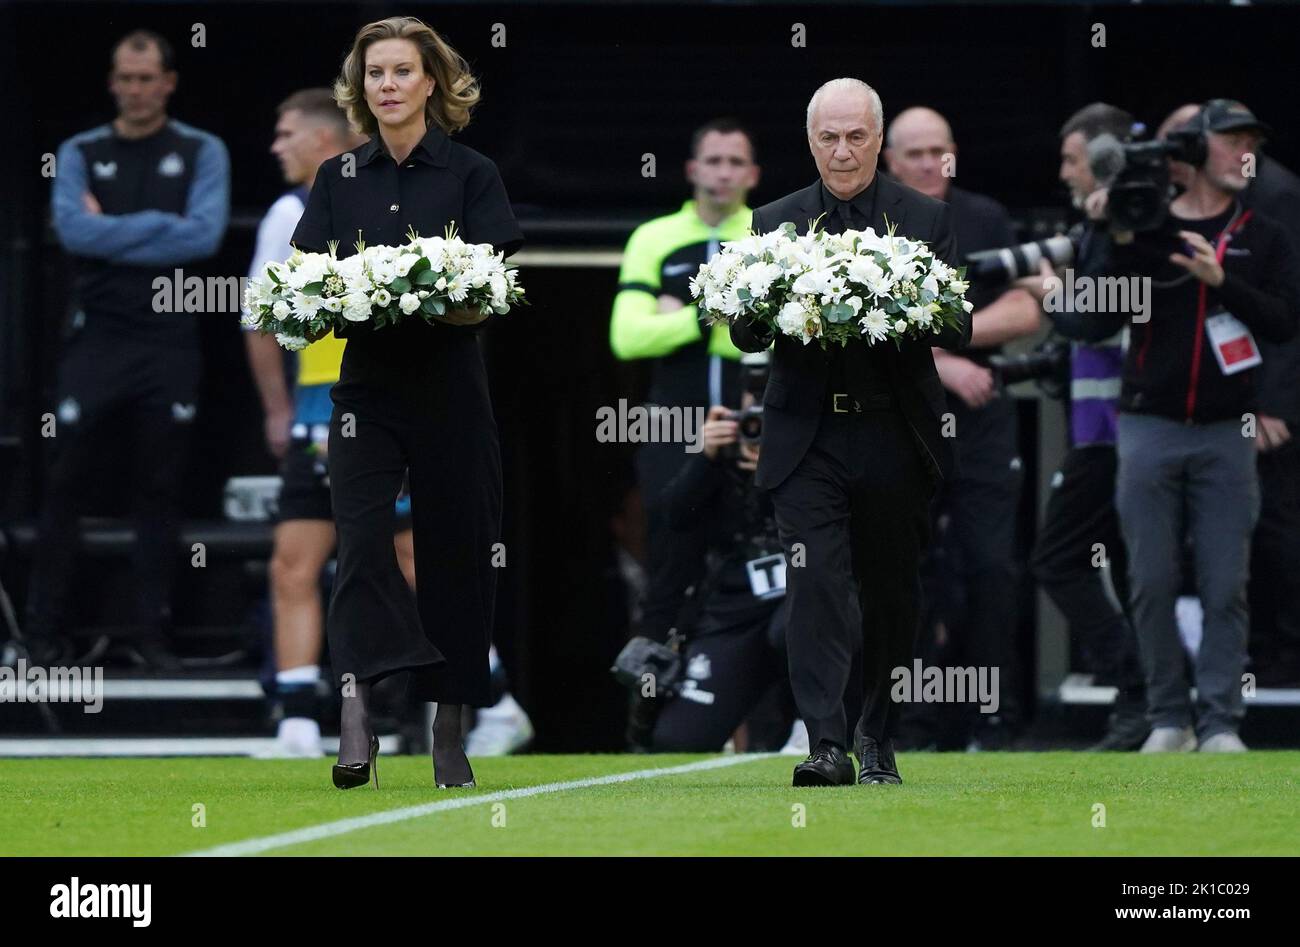 Chairman of AFC Bournemouth Jeff Mostyn and Newcastle United's co-owner Amanda Staveley lay wreaths in memory of Queen Elizabeth II, ahead of the Premier League match at St James' Park, Newcastle. Picture date: Saturday September 17, 2022. Stock Photo